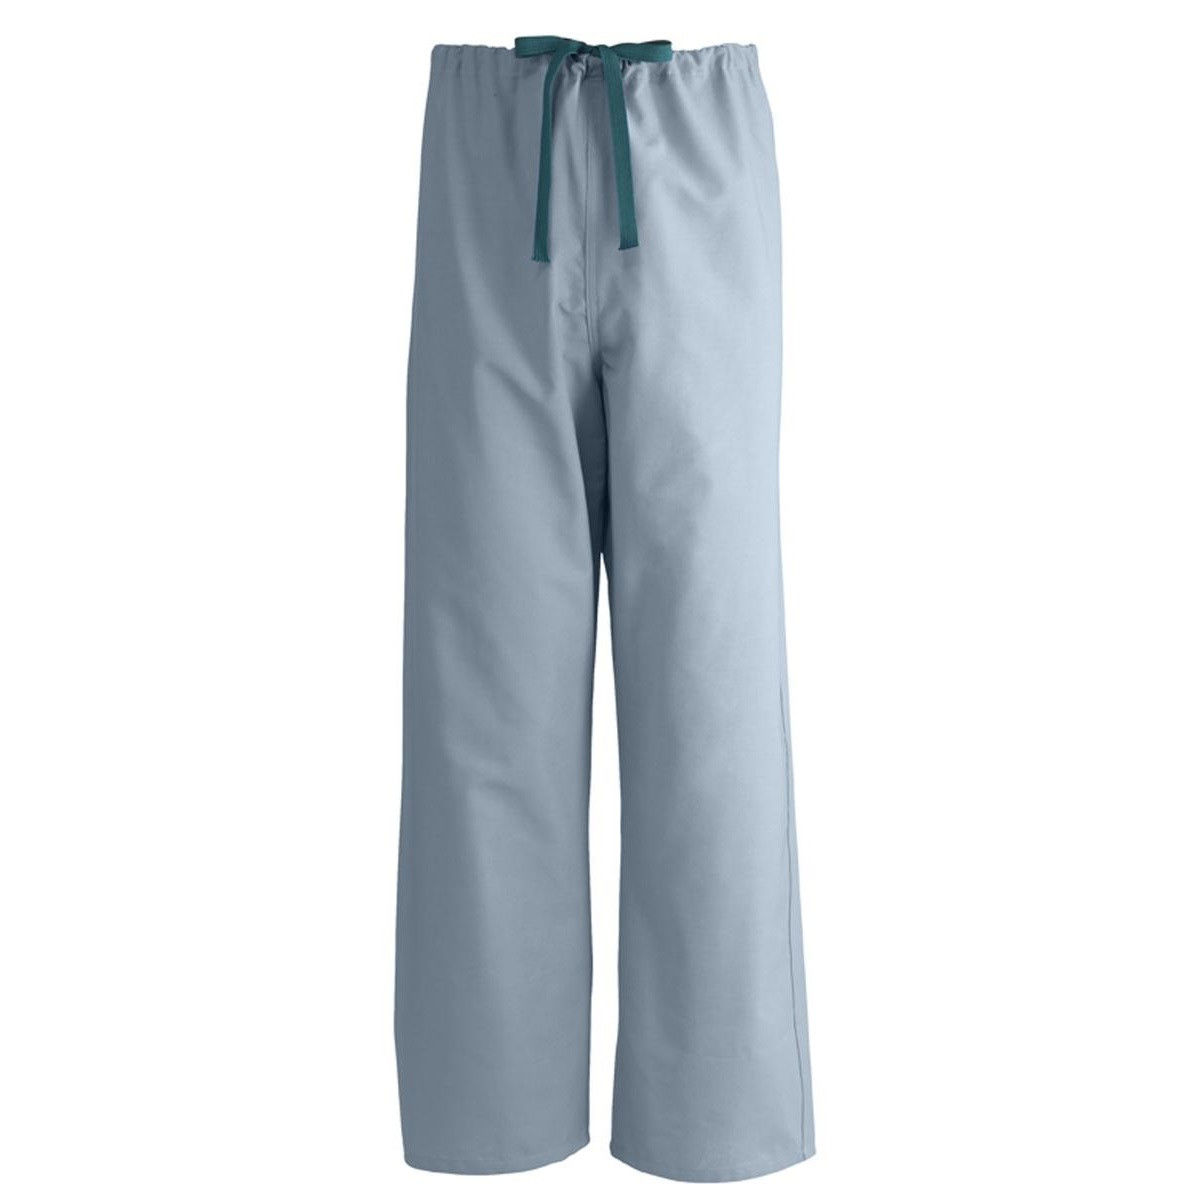 Can I get samples of the misty green scrubs from EconoBlen™ Unisex Reversible Scrub Pants?